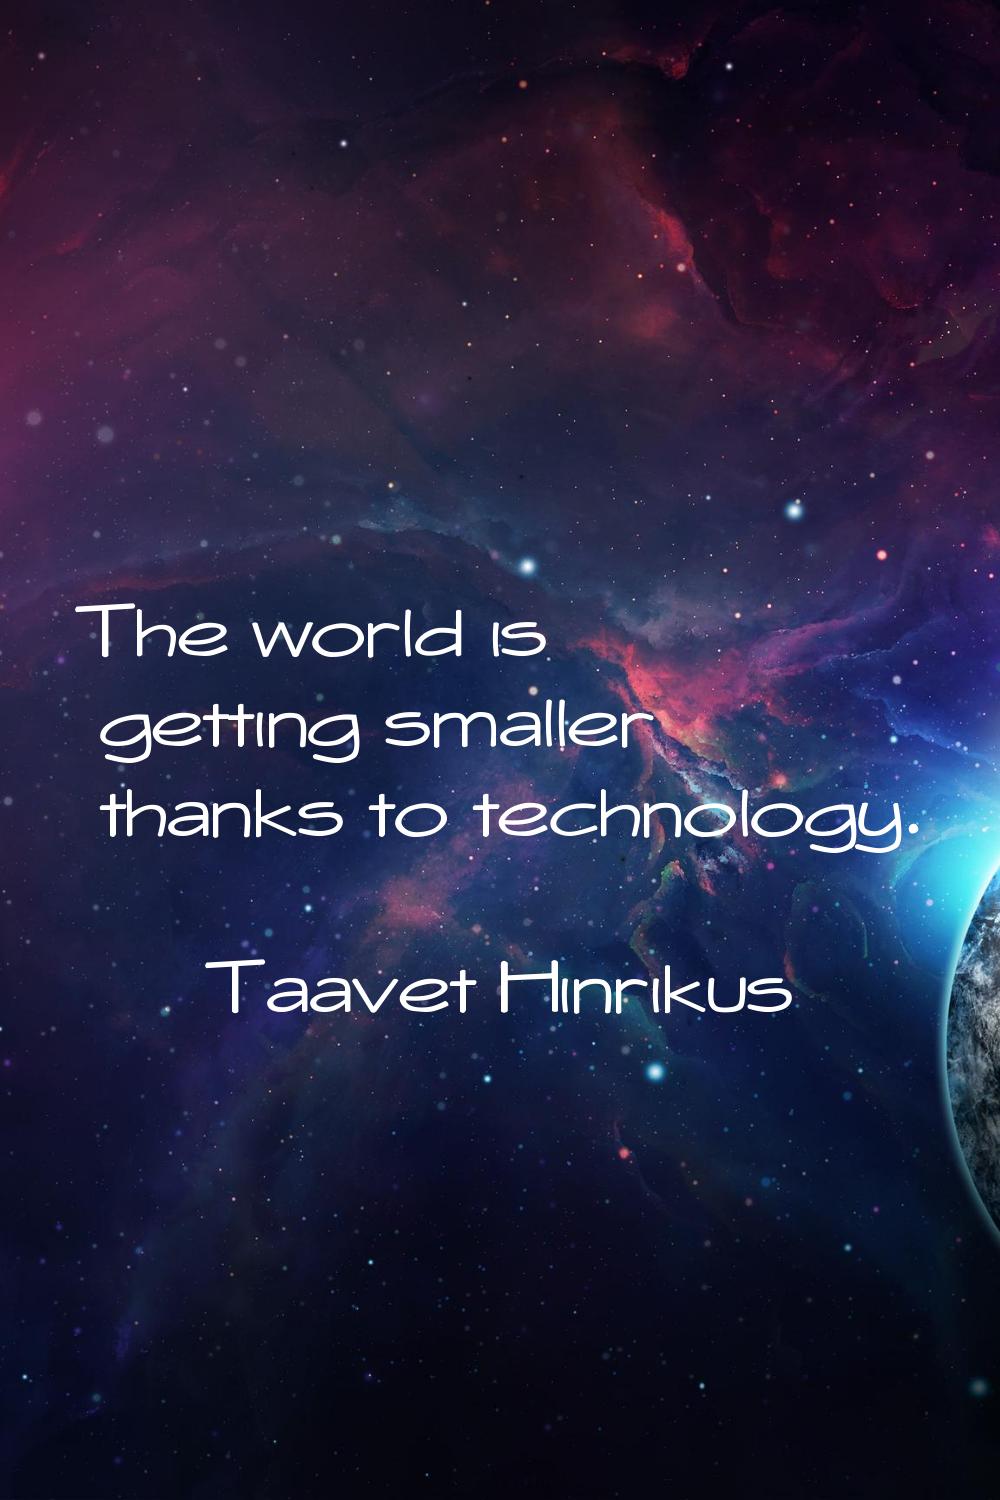 The world is getting smaller thanks to technology.